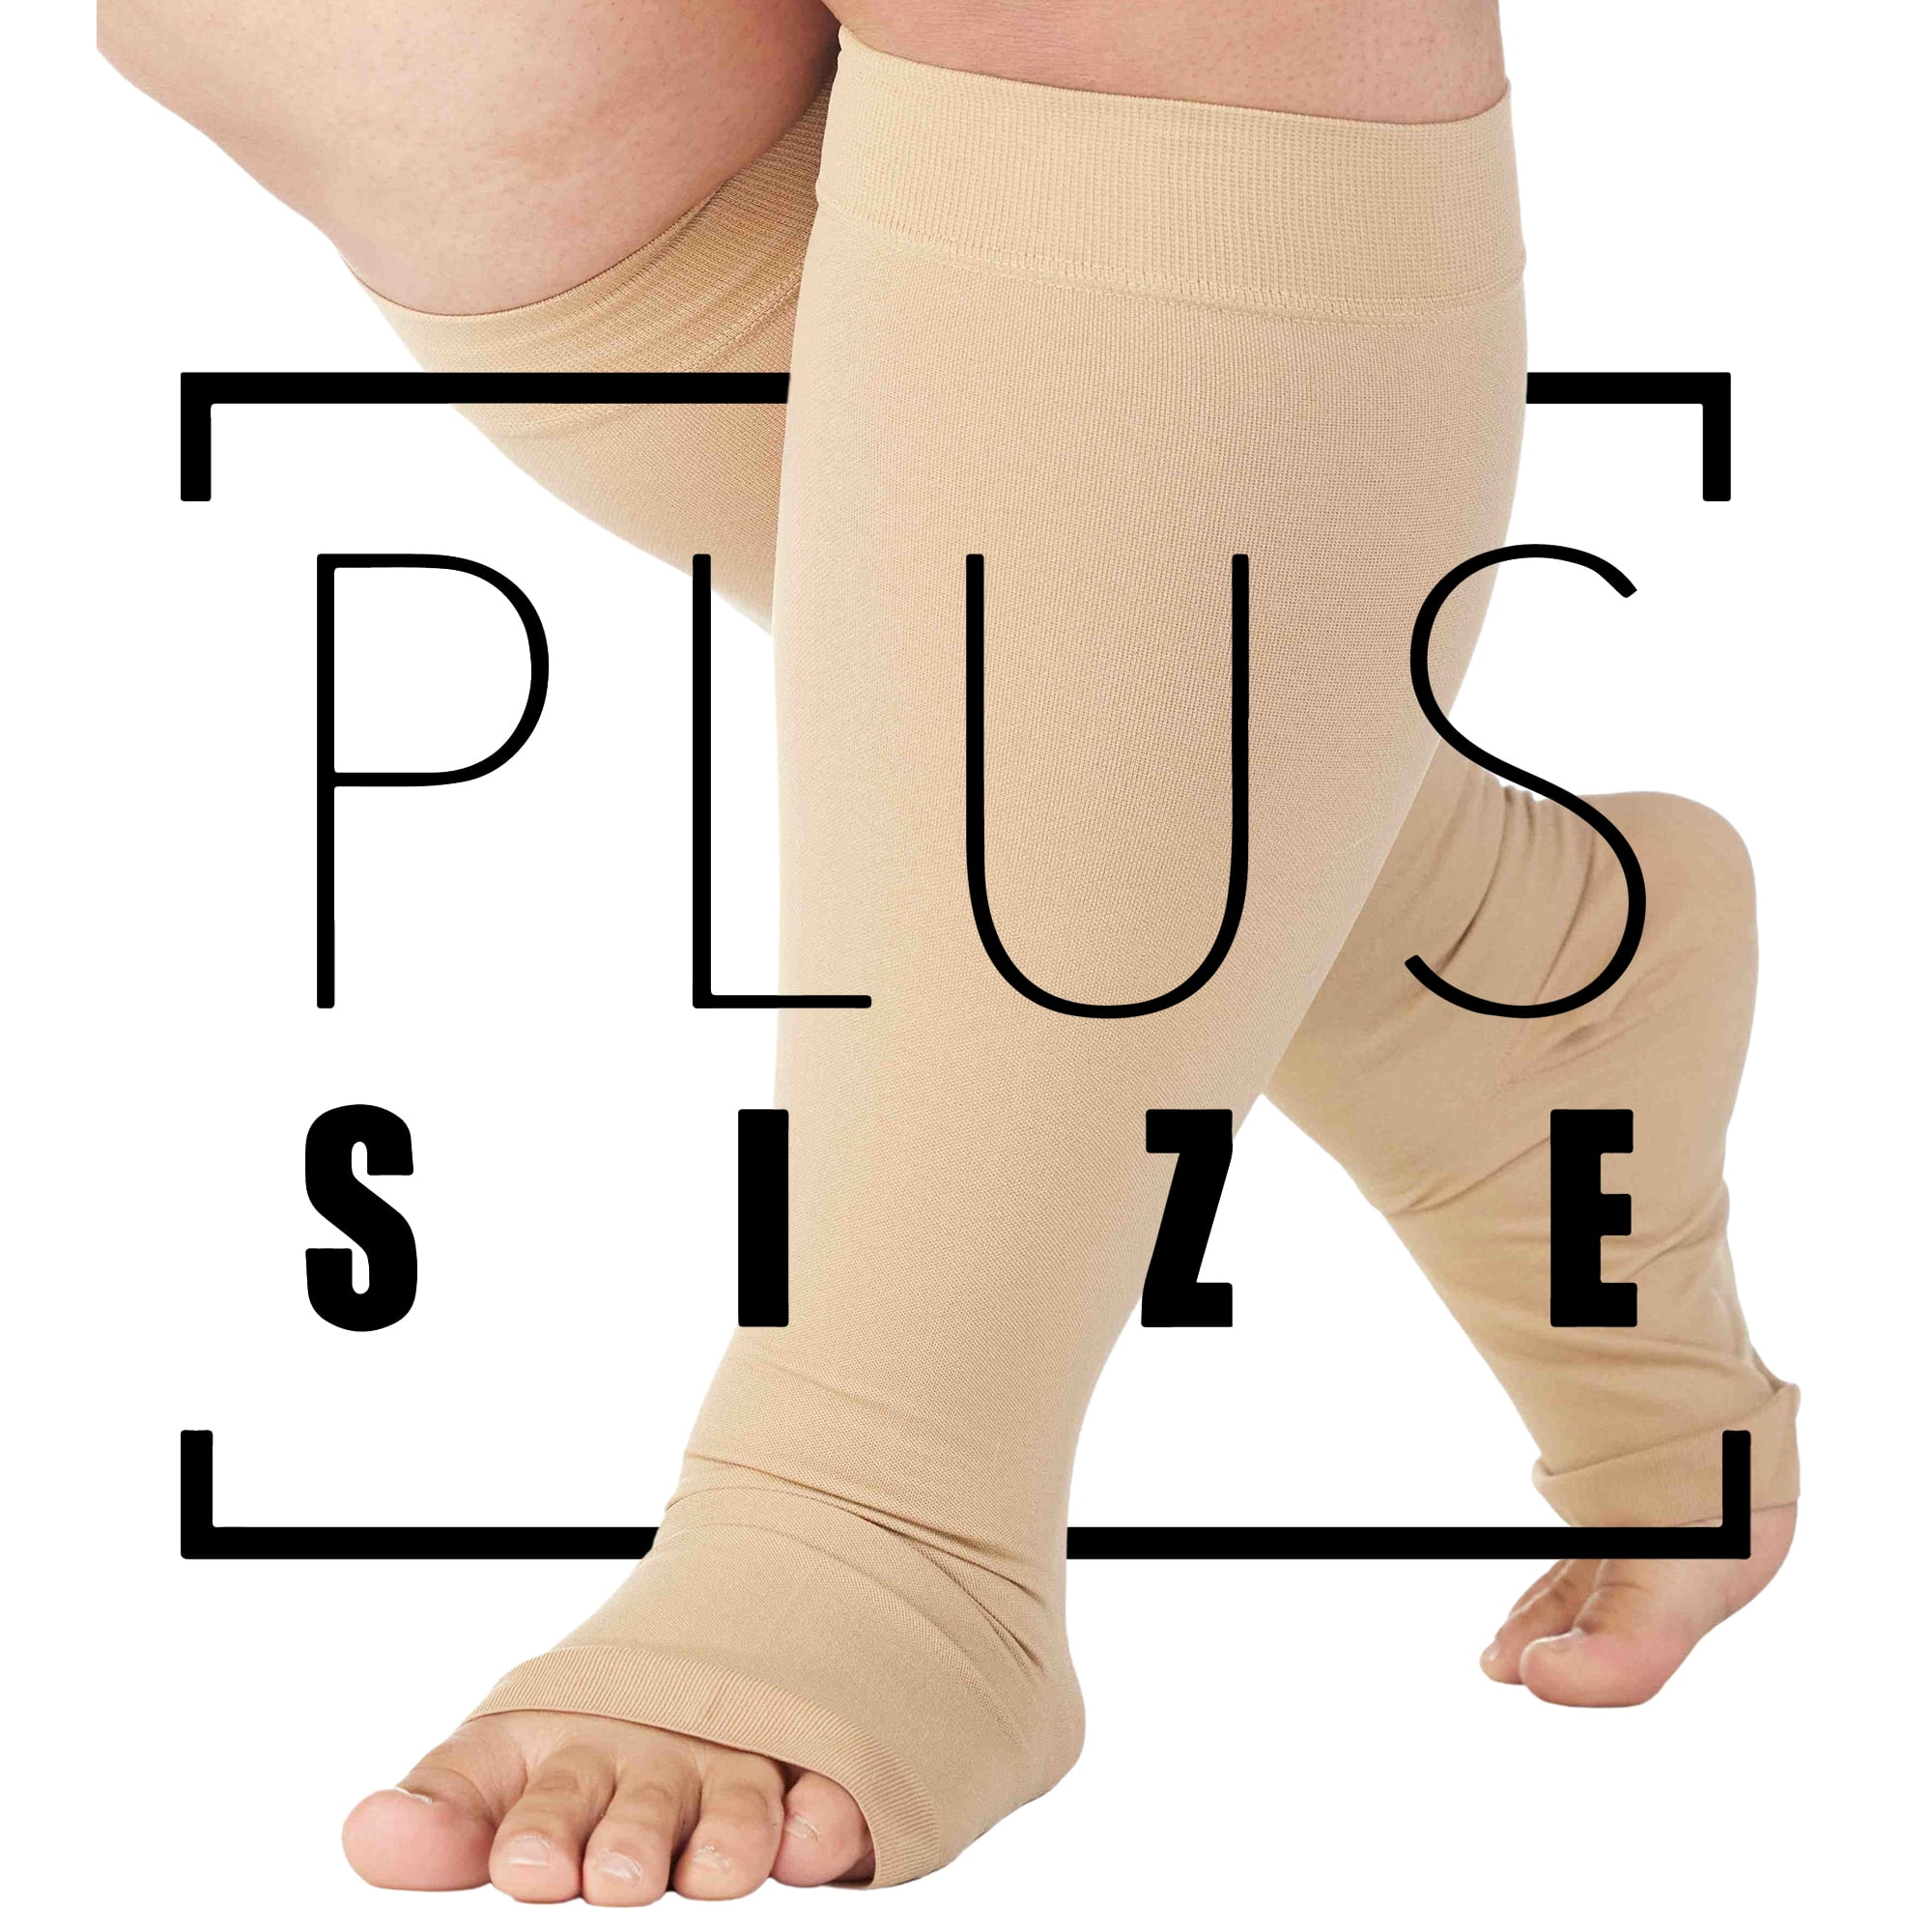 6XL Plus Size Unisex Compression Knee High Stockings 20-30mmHg - Wide Calf Compression  Socks with Open Toe for Men and Women Circulation, Lymphedema, Diabetes, DVT,  Swelling - Beige, 6X-Large 